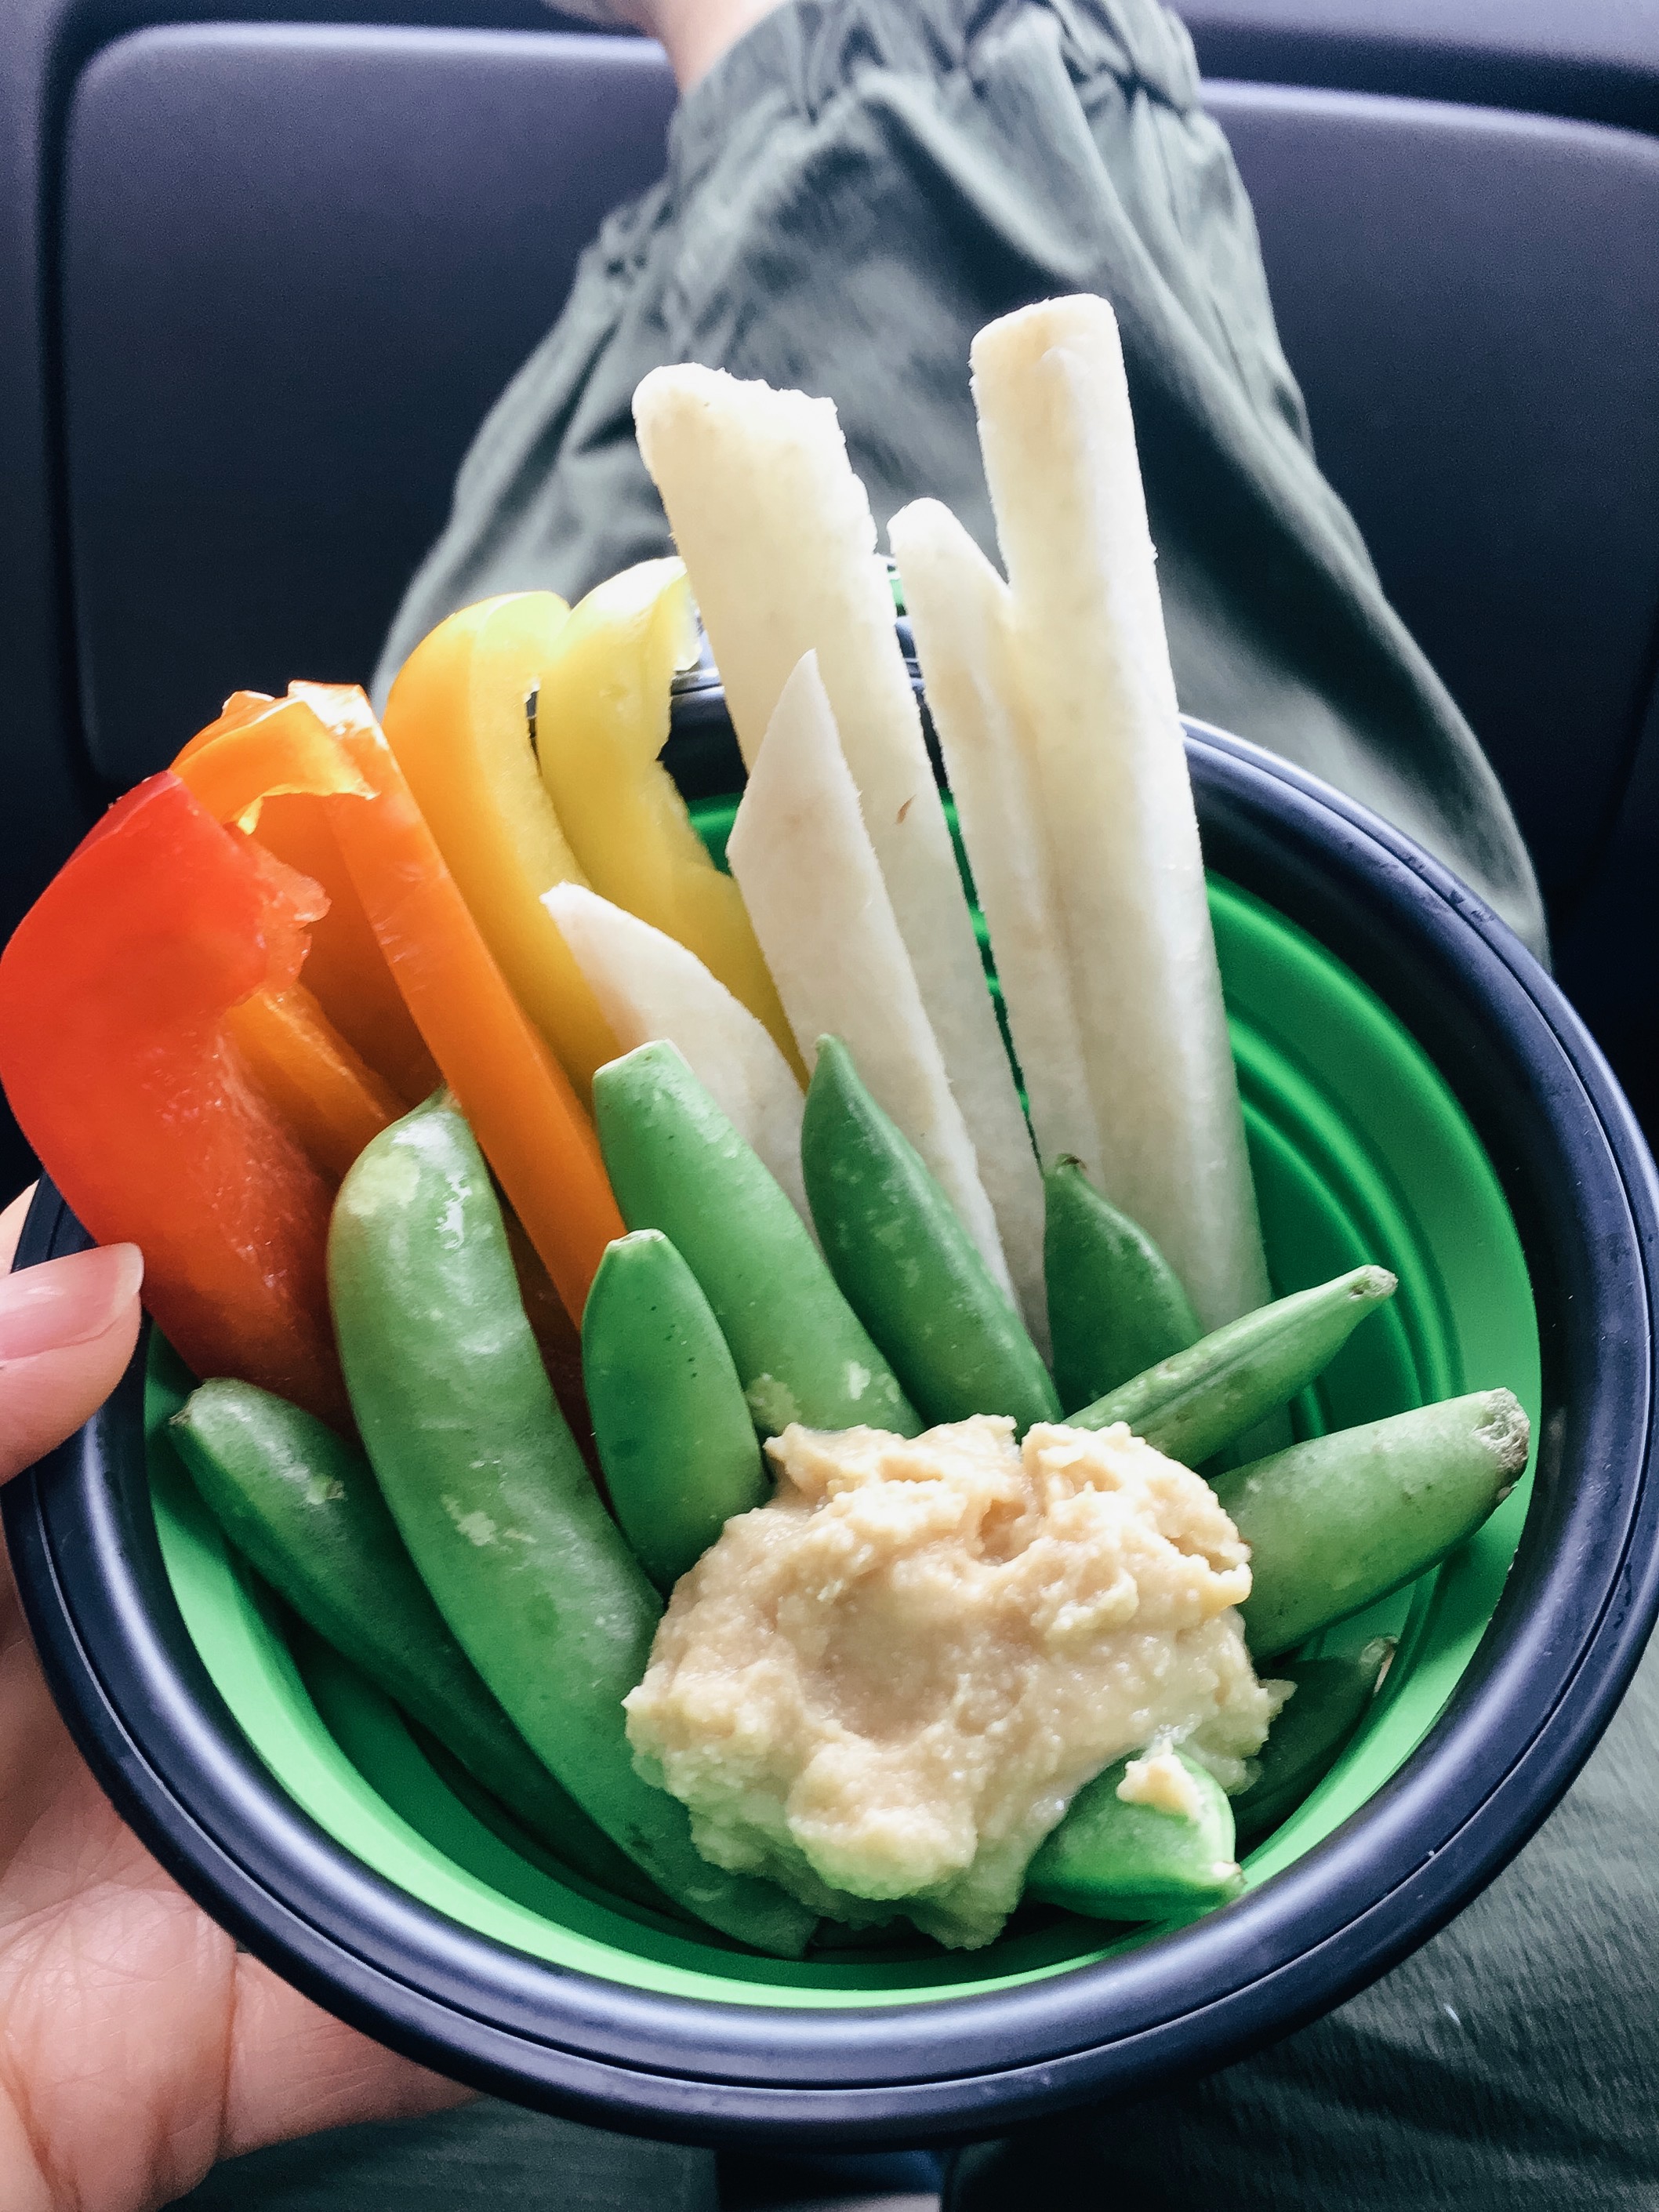 Healthy, Kid-Friendly Foods to Eat on Road Trips, Plus My Favorite Travel Bowl